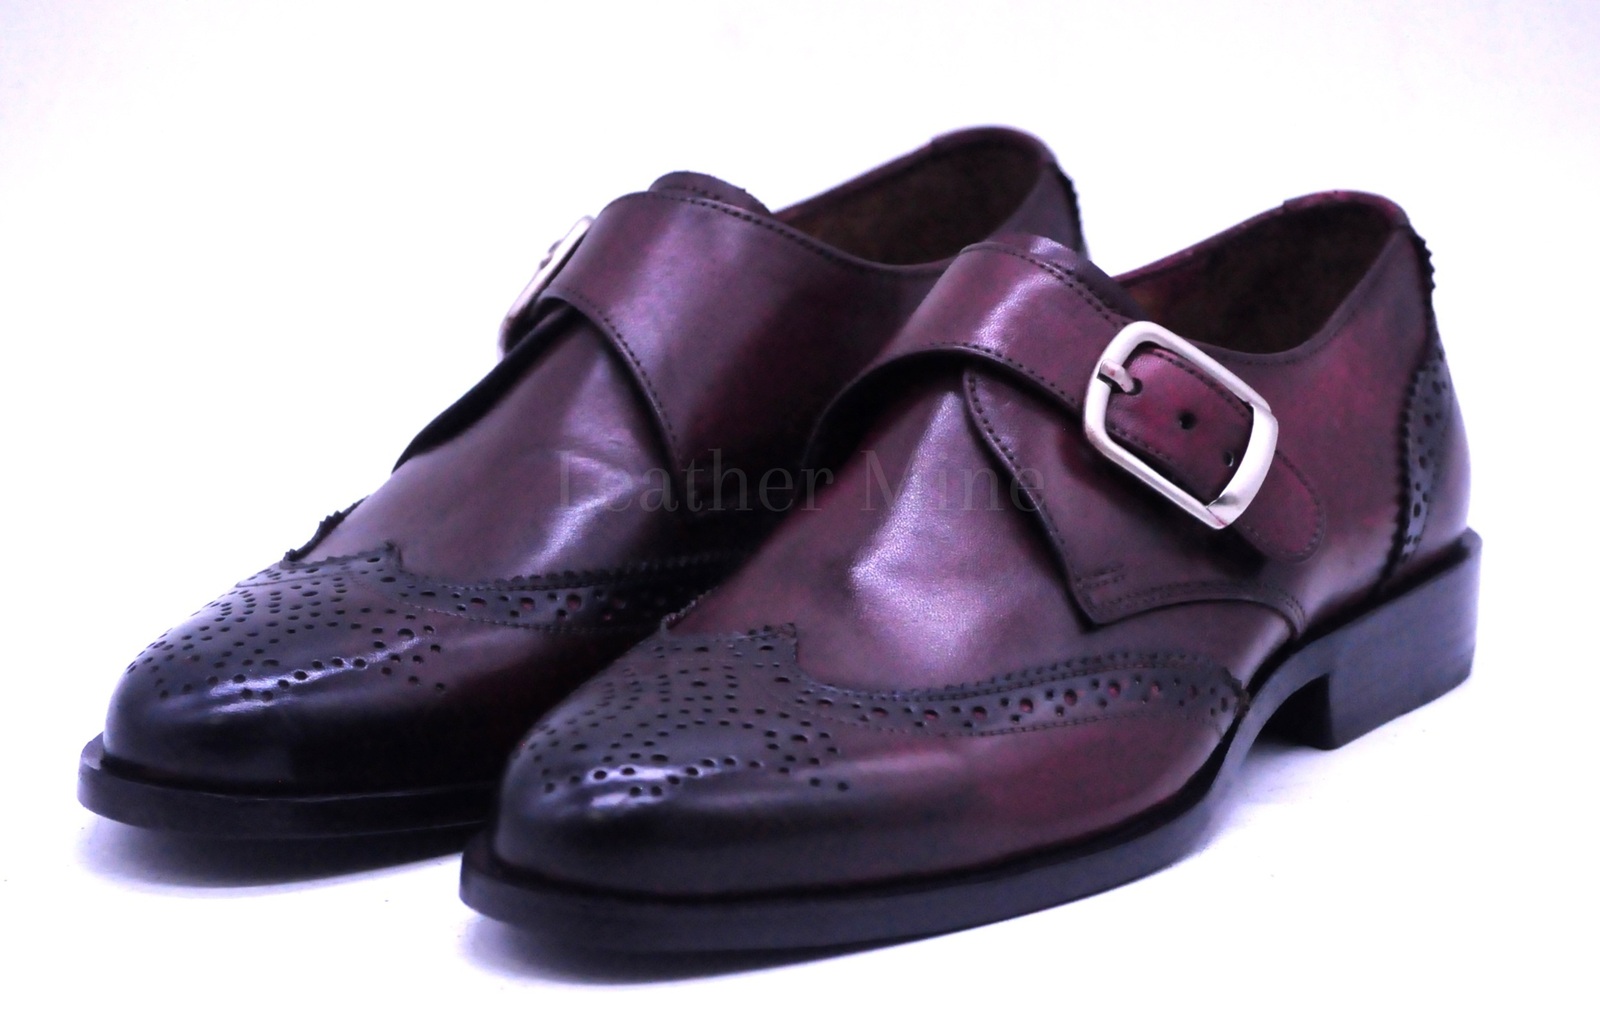 Men's Handmade Ox Blood Leather Brogue Monk Formal Custom Made Shoes